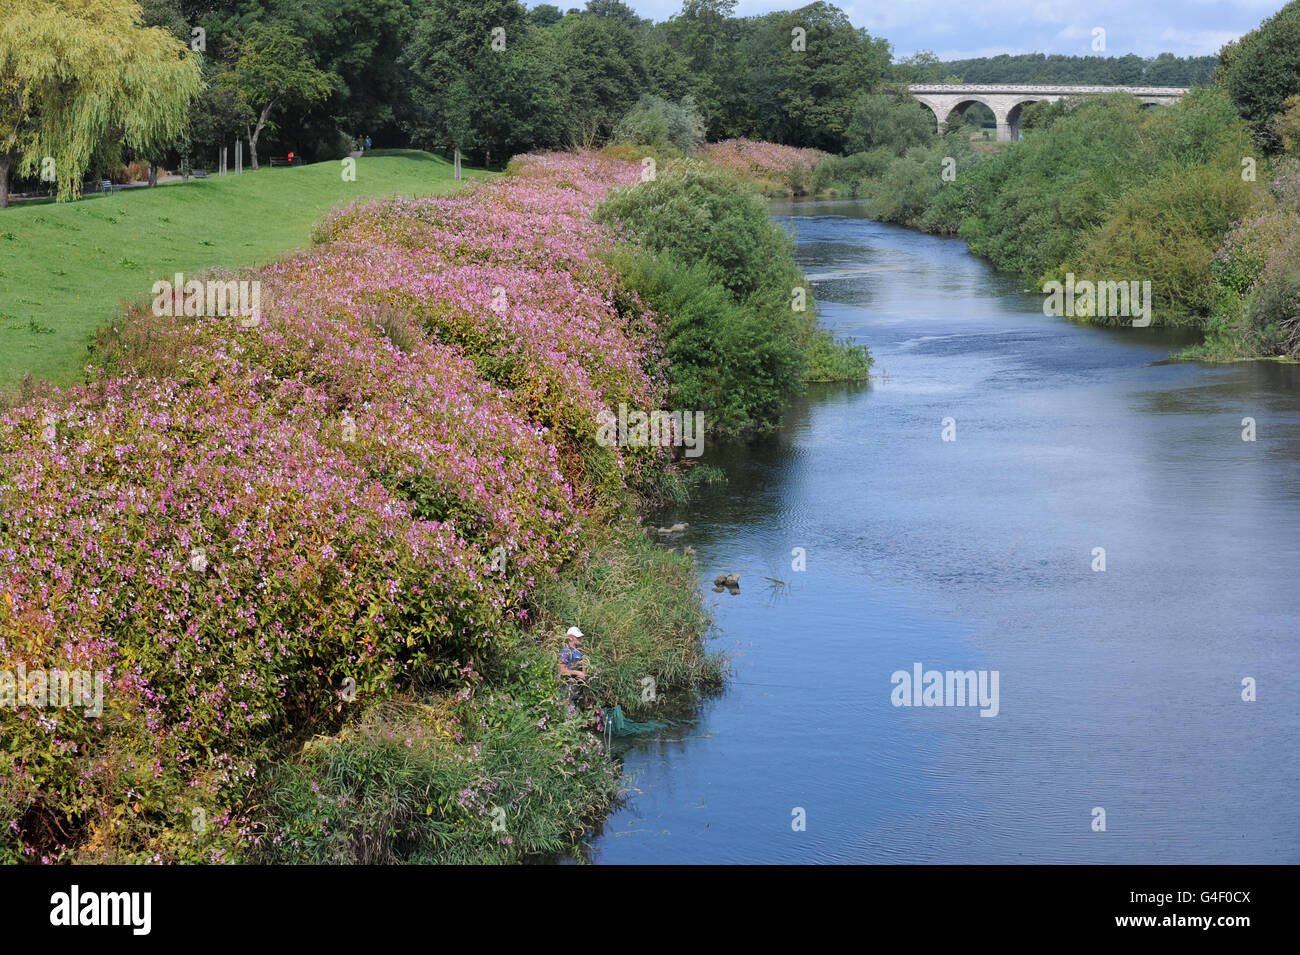 The river bank is covered with colourful, but invasive Poor Man orchid flowers following the hot weather, making it difficult for an angler to find a spot by the the River Wharfe, near Tadcaster. Stock Photo